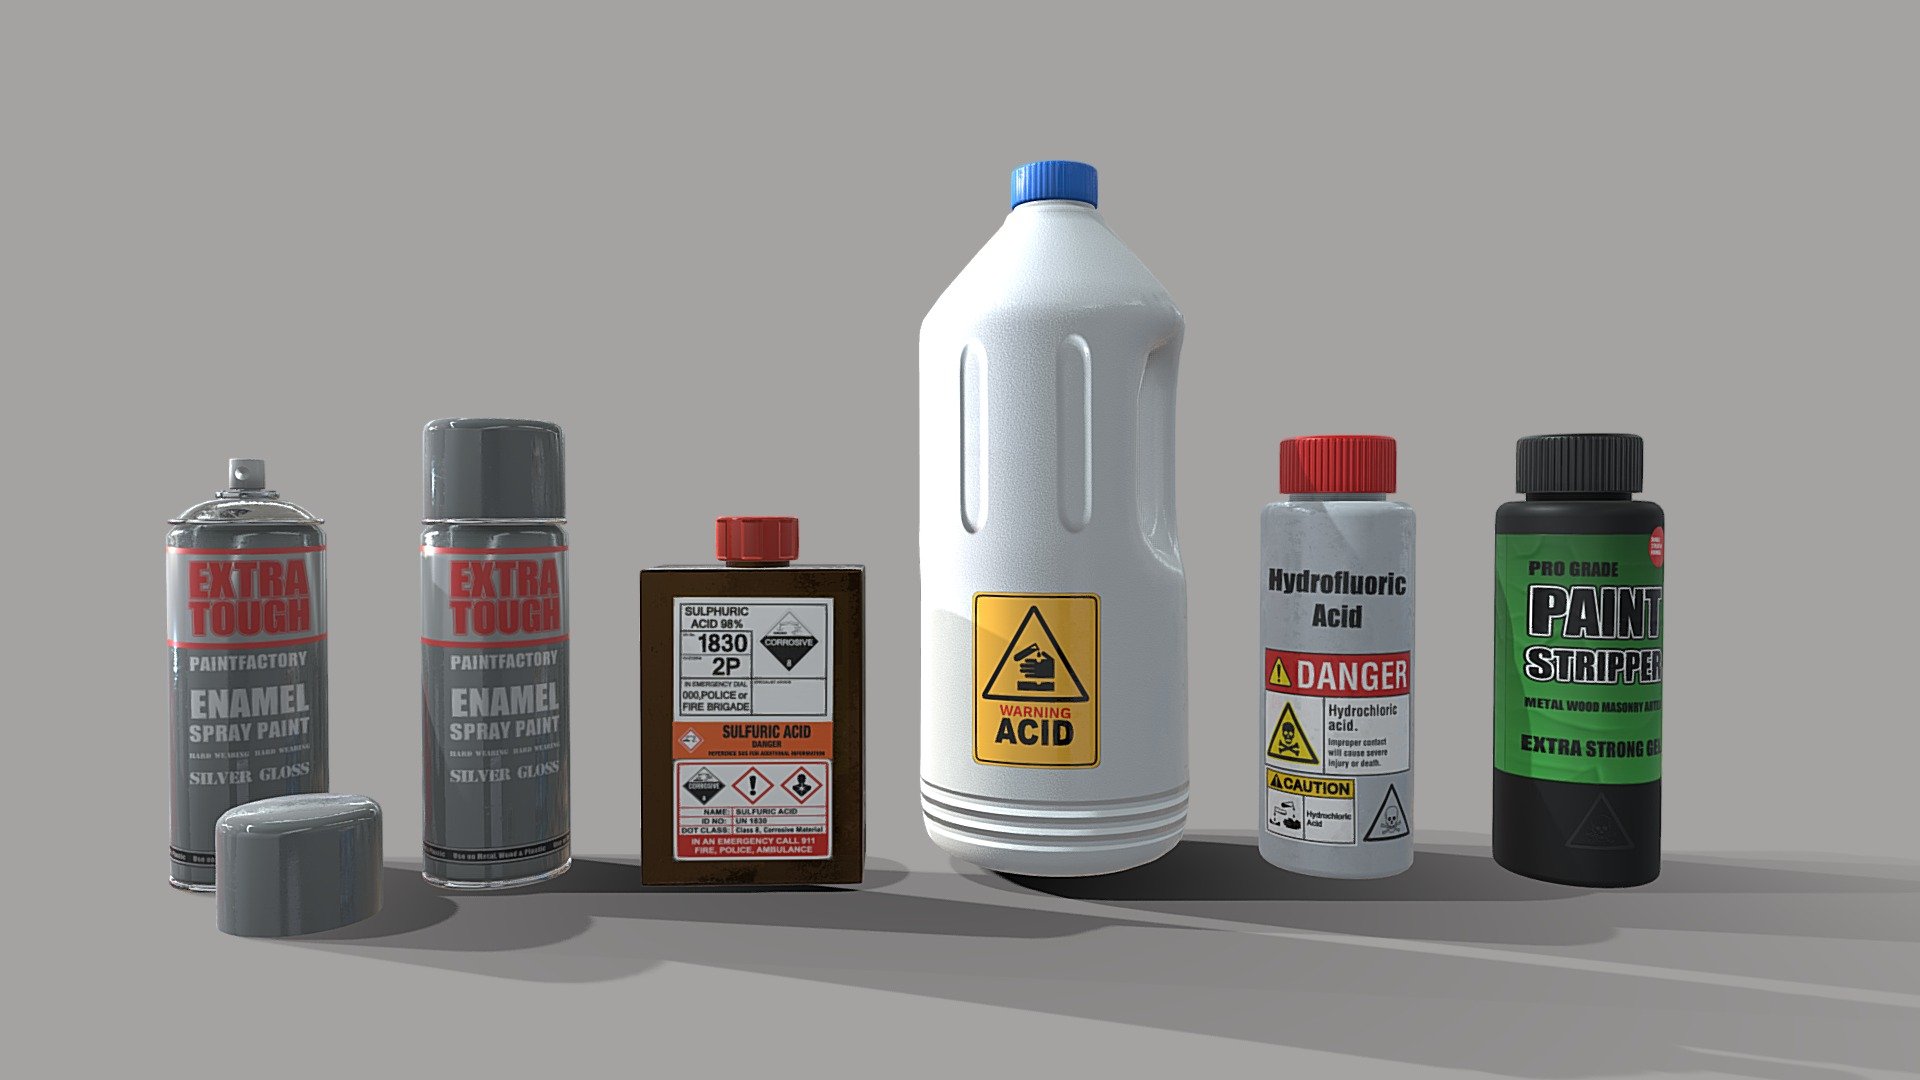 Handy set of chemical bottles to use any any sort of environment such as a Laboratory or a garage.  

Sulfuric acid
hydrofluoric acid
Spray paint
Generic Acid 
Paint stripper

PBE textures @4k - Selection of chemical products - Buy Royalty Free 3D model by Sousinho 3d model